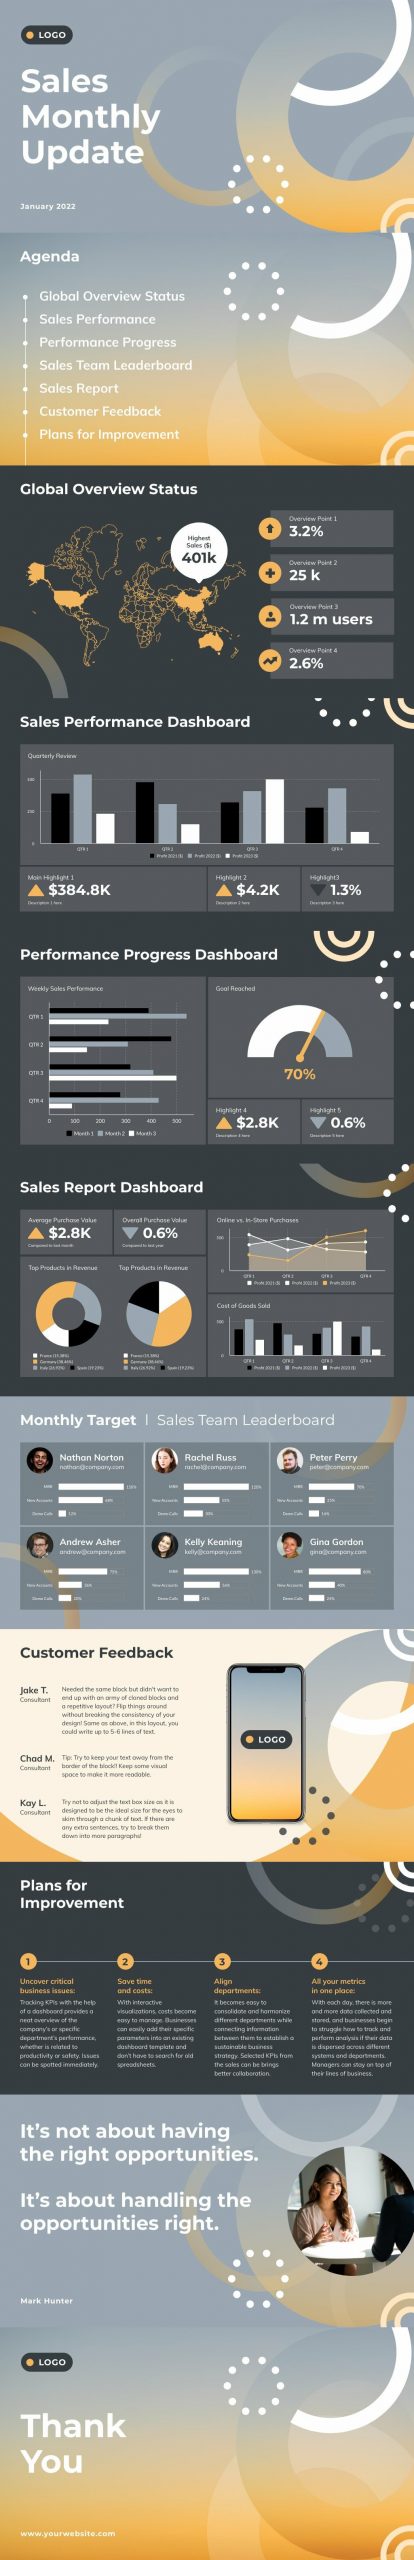 Sales Monthly Update Widescreen Presentation Template